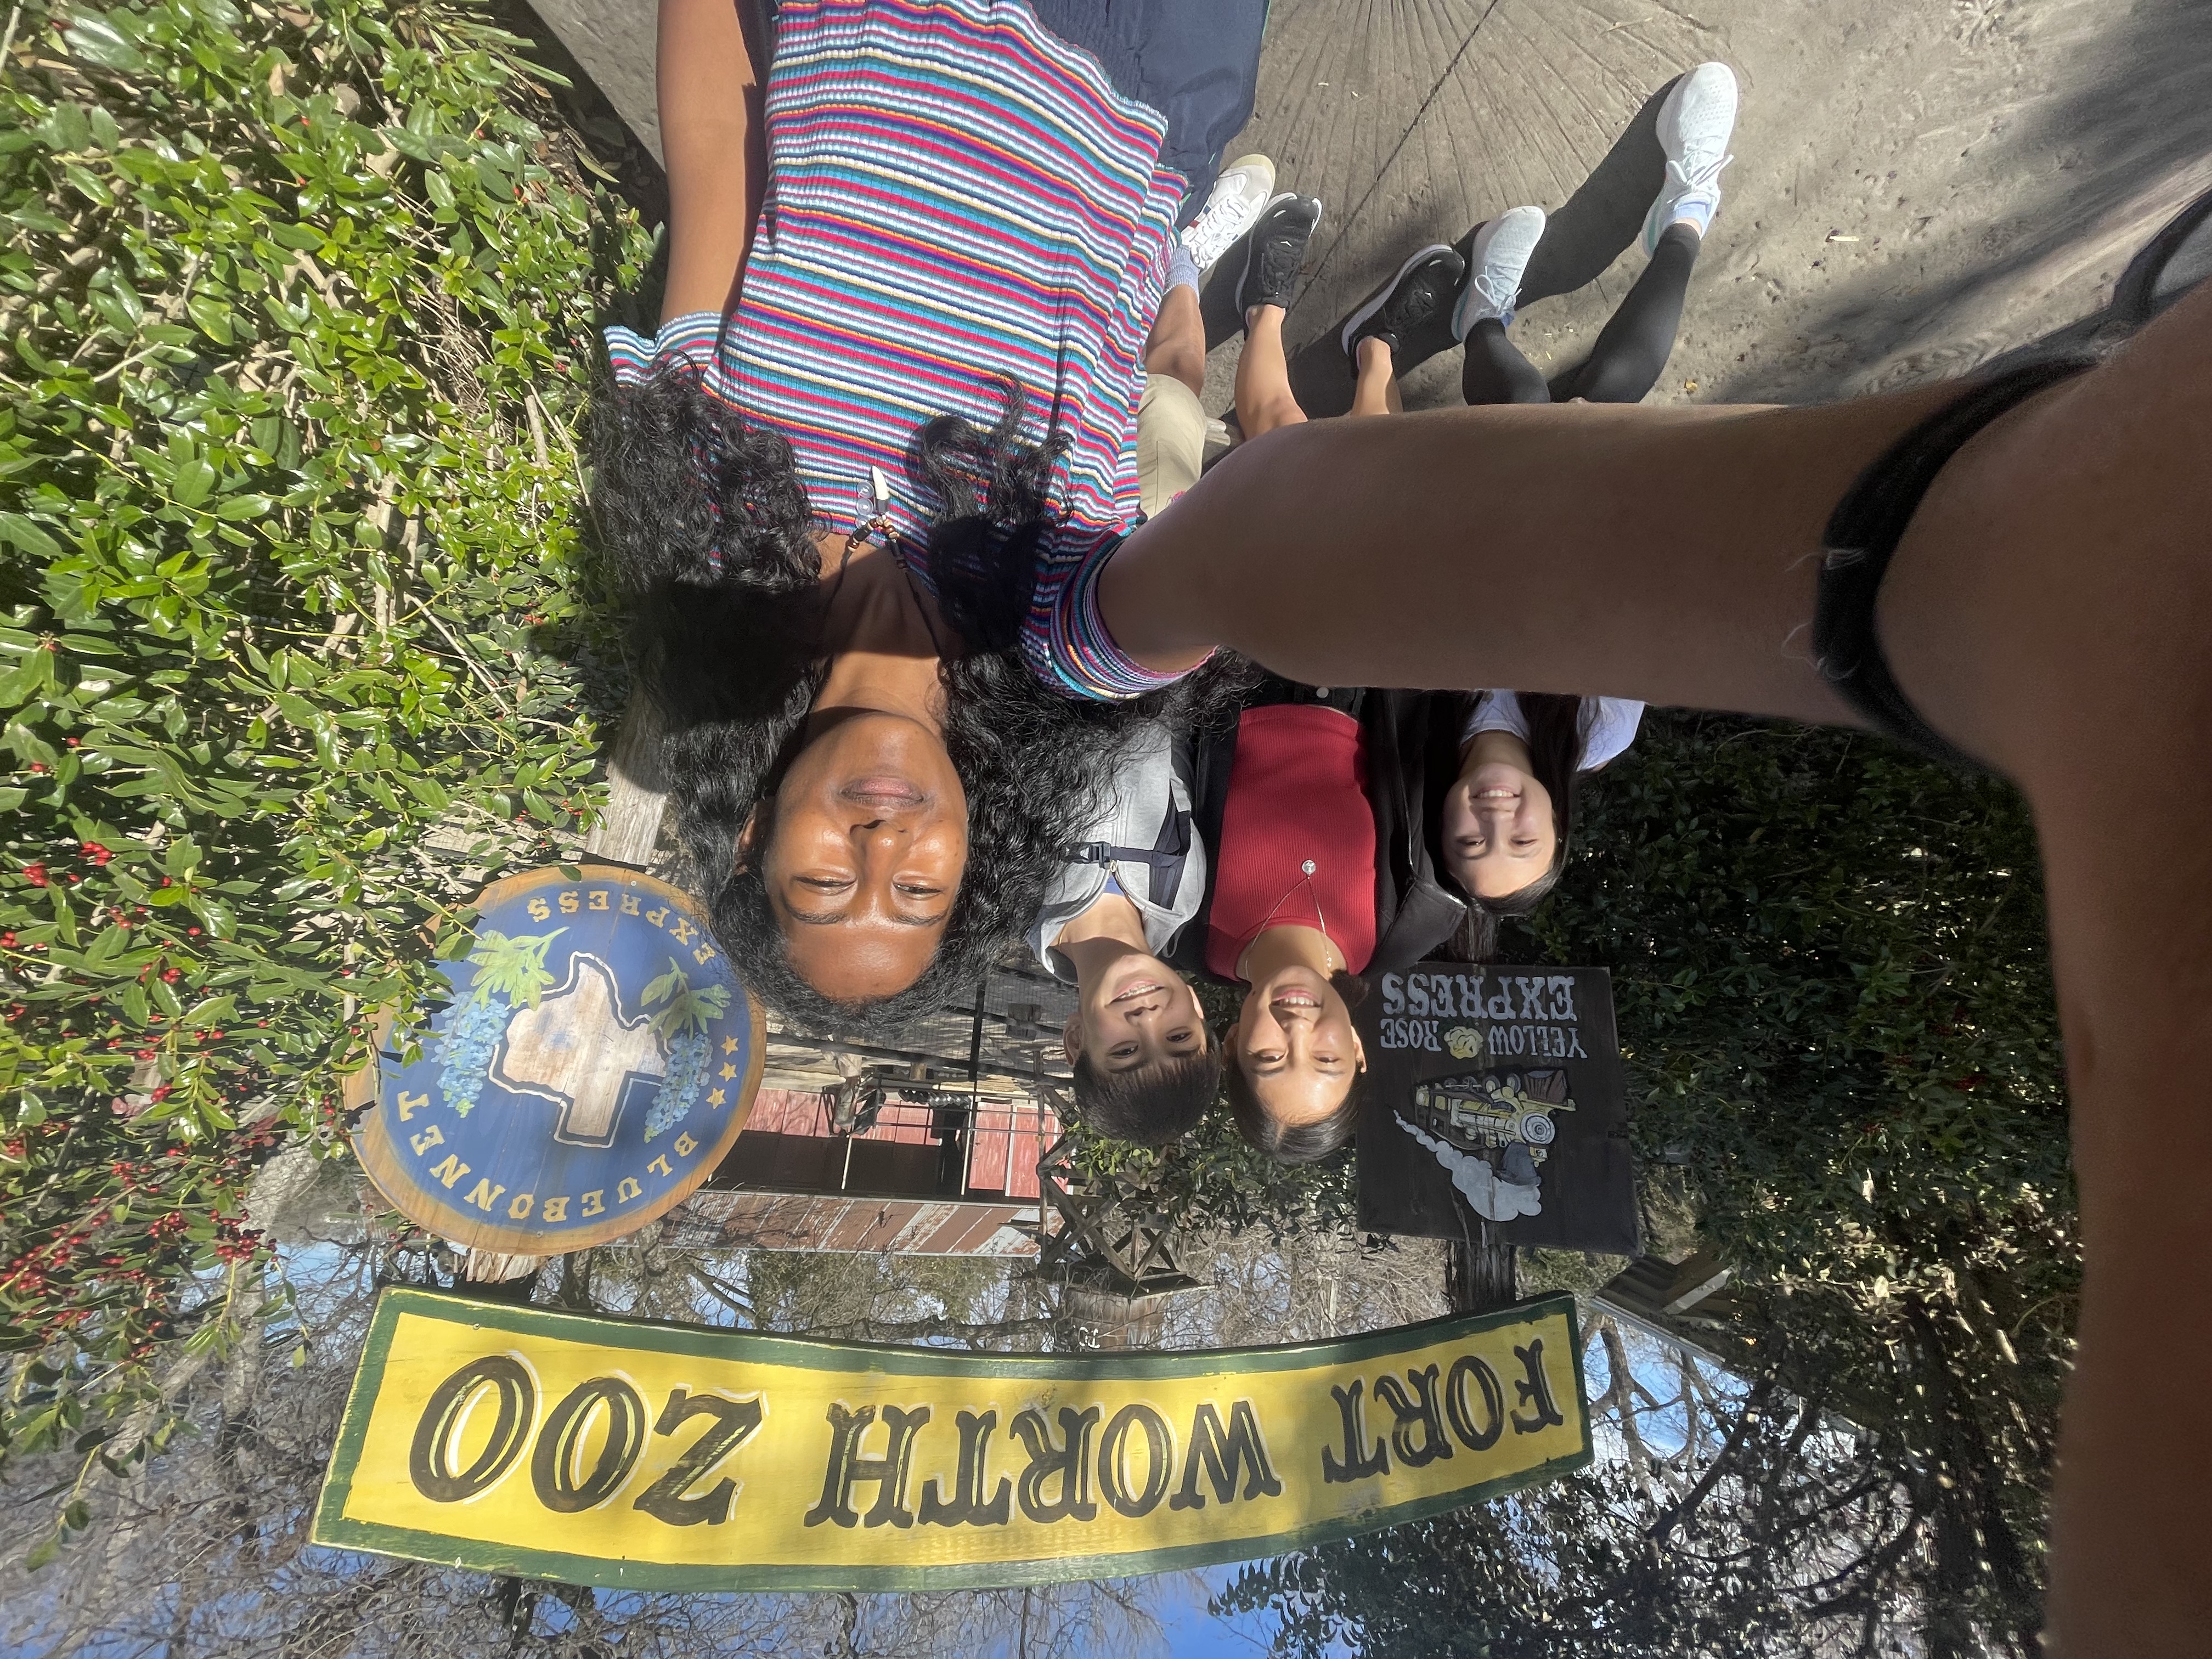 A selfie taken by one person with four people in frame and a "Fort Worth Zoo" sign behind them.